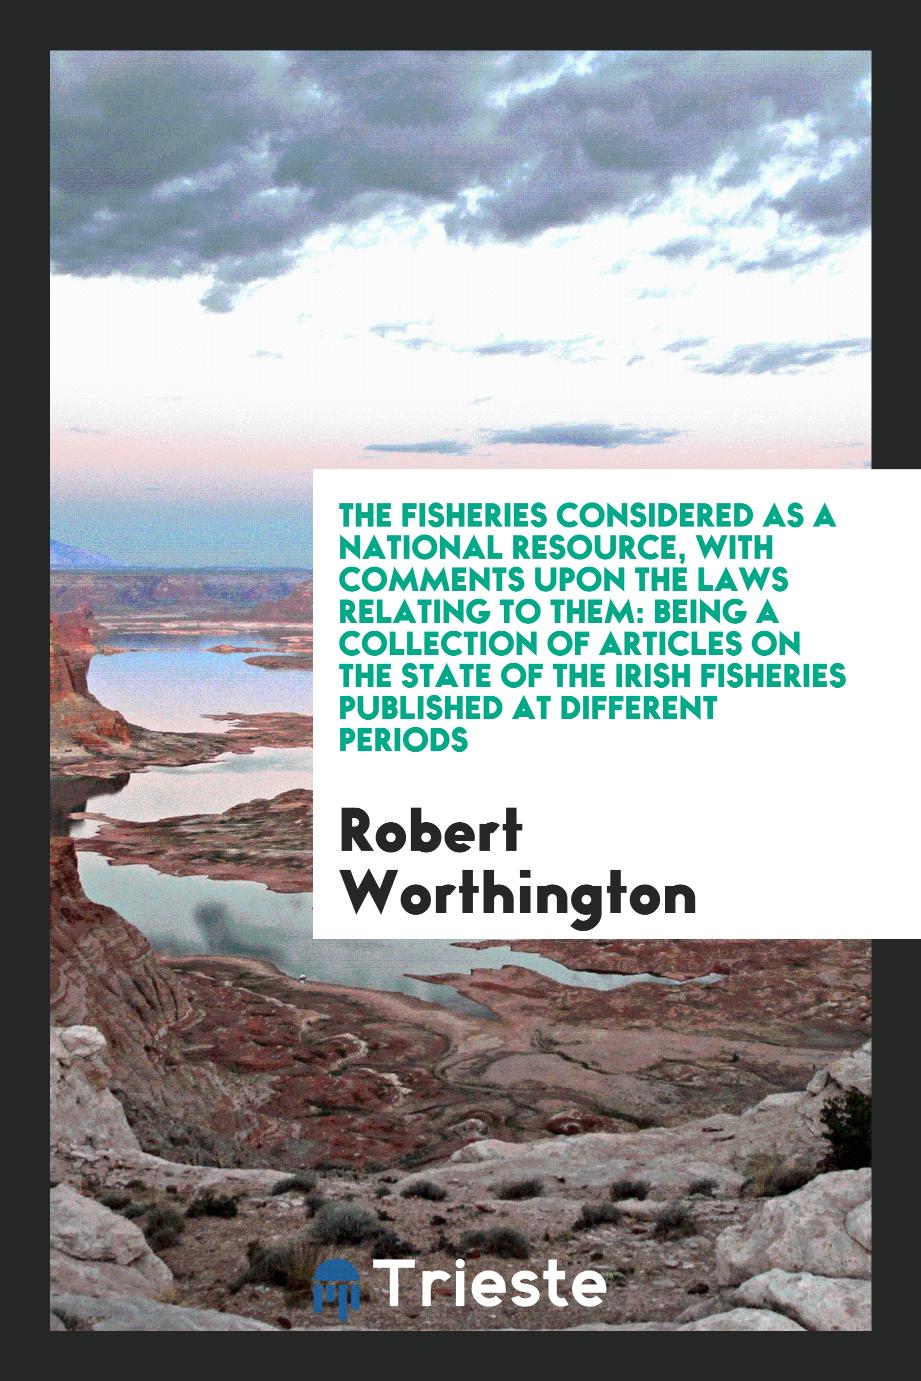 The fisheries considered as a national resource, with comments upon the laws relating to them: being a collection of articles on the state of the Irish fisheries published at different periods